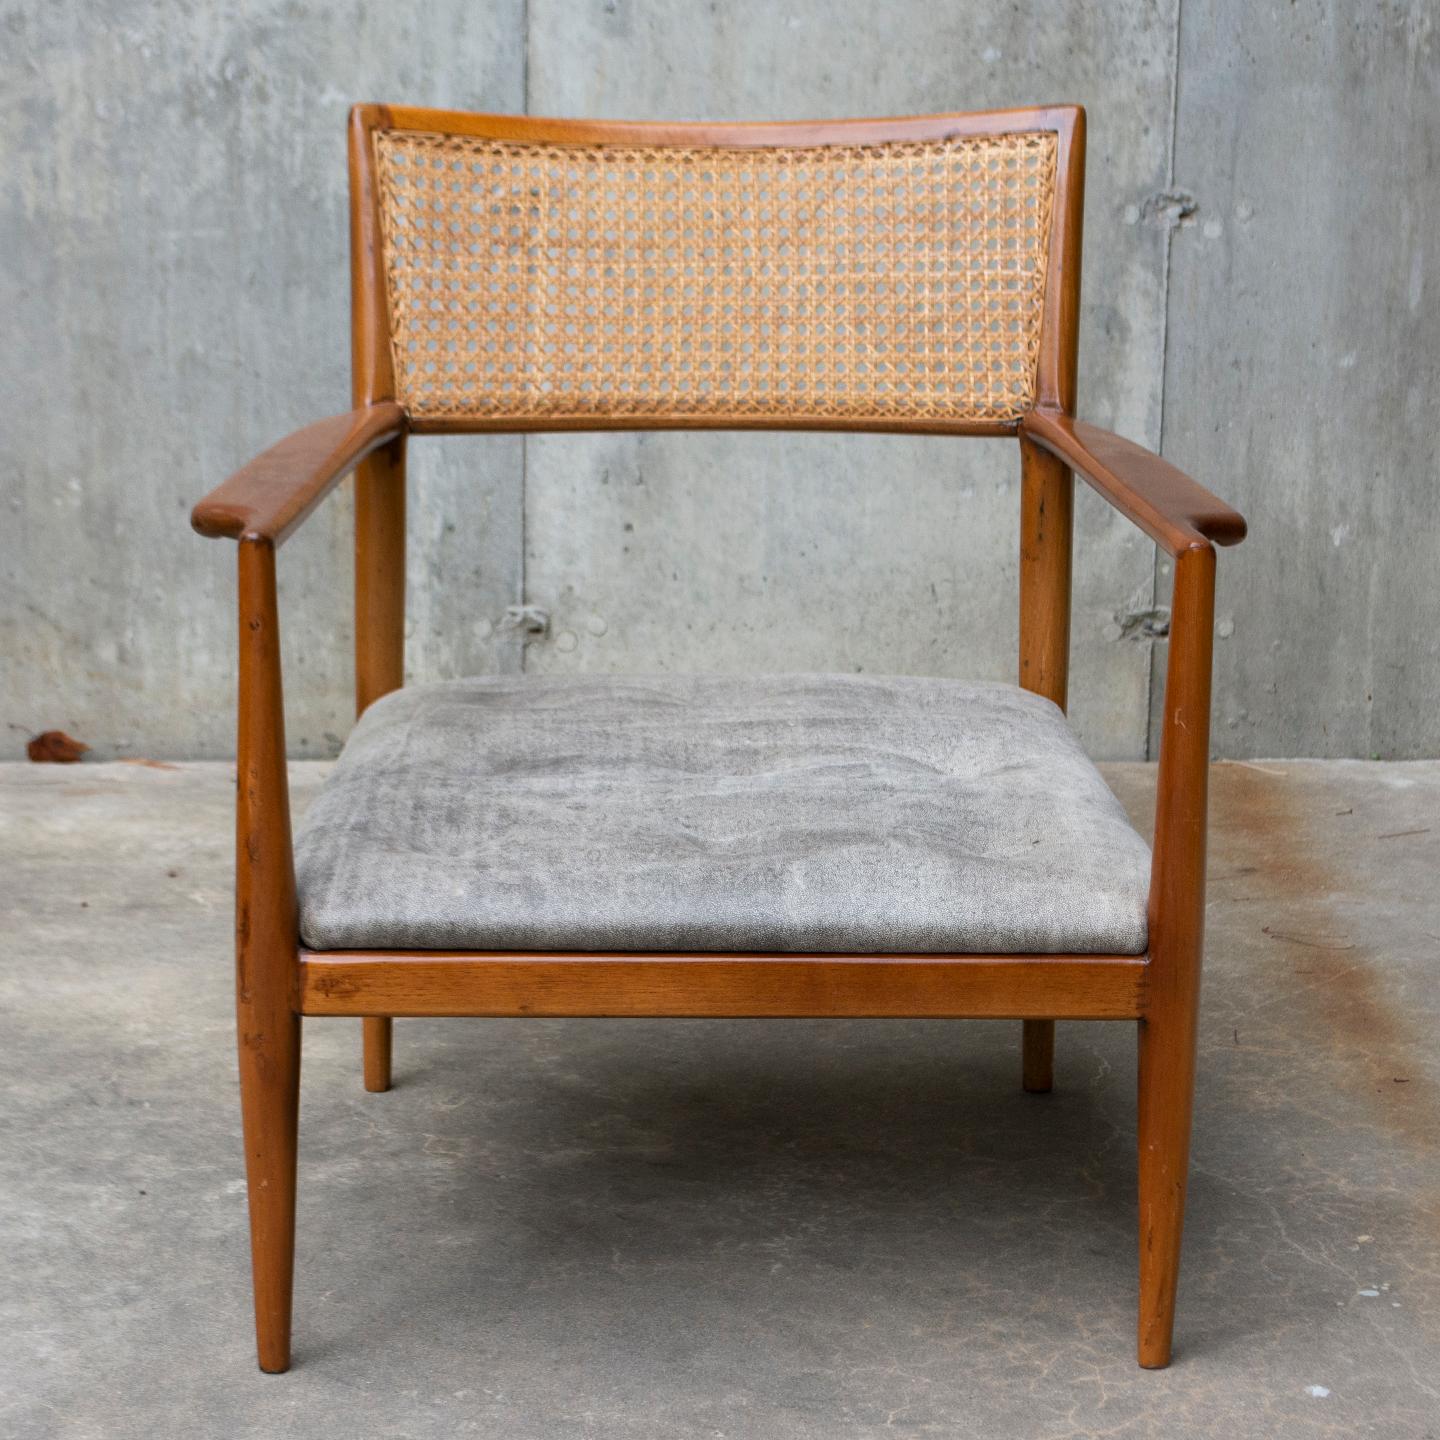 The warm brown color of this chair’s slender frame beautifully complements the cool gray upholstery of the tufted seat. Carved from rosewood, the chair boasts gracefully carved arm rests, classic rattan back, and toothpick legs, a hallmark of modern